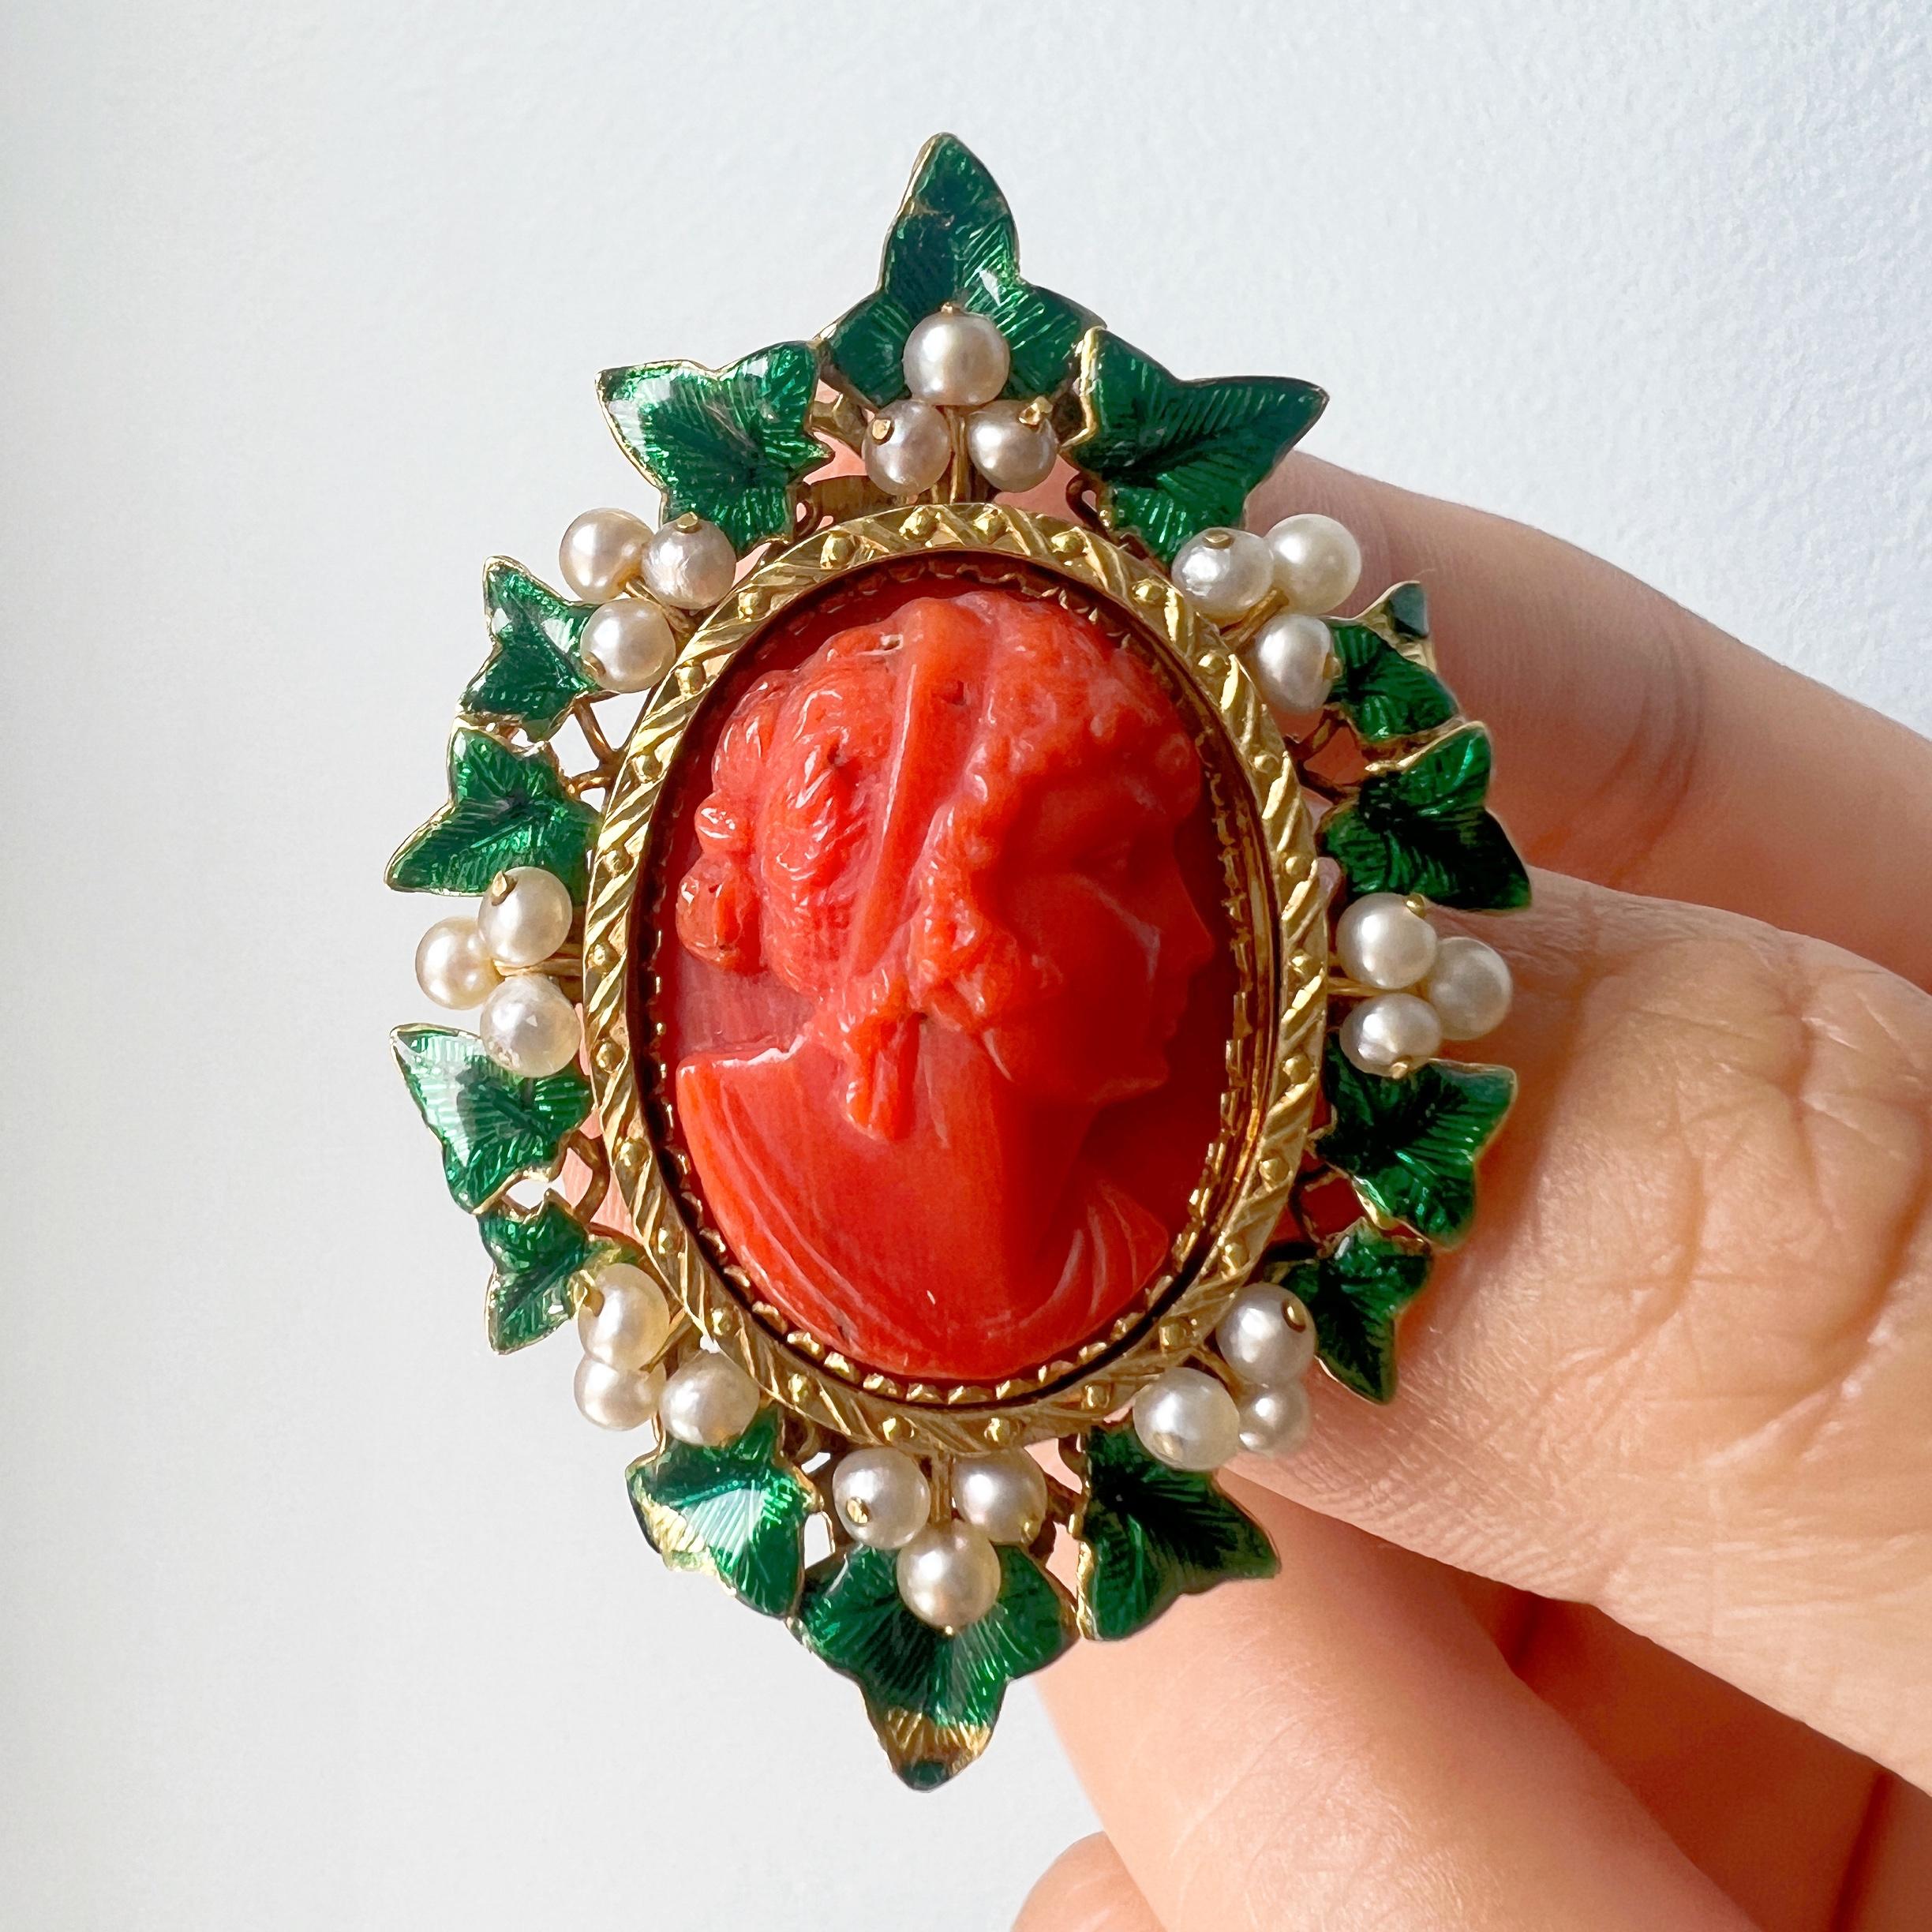 Bead Victorian 18K gold coral cameo brooch with ivy leaves and natural seed pearls